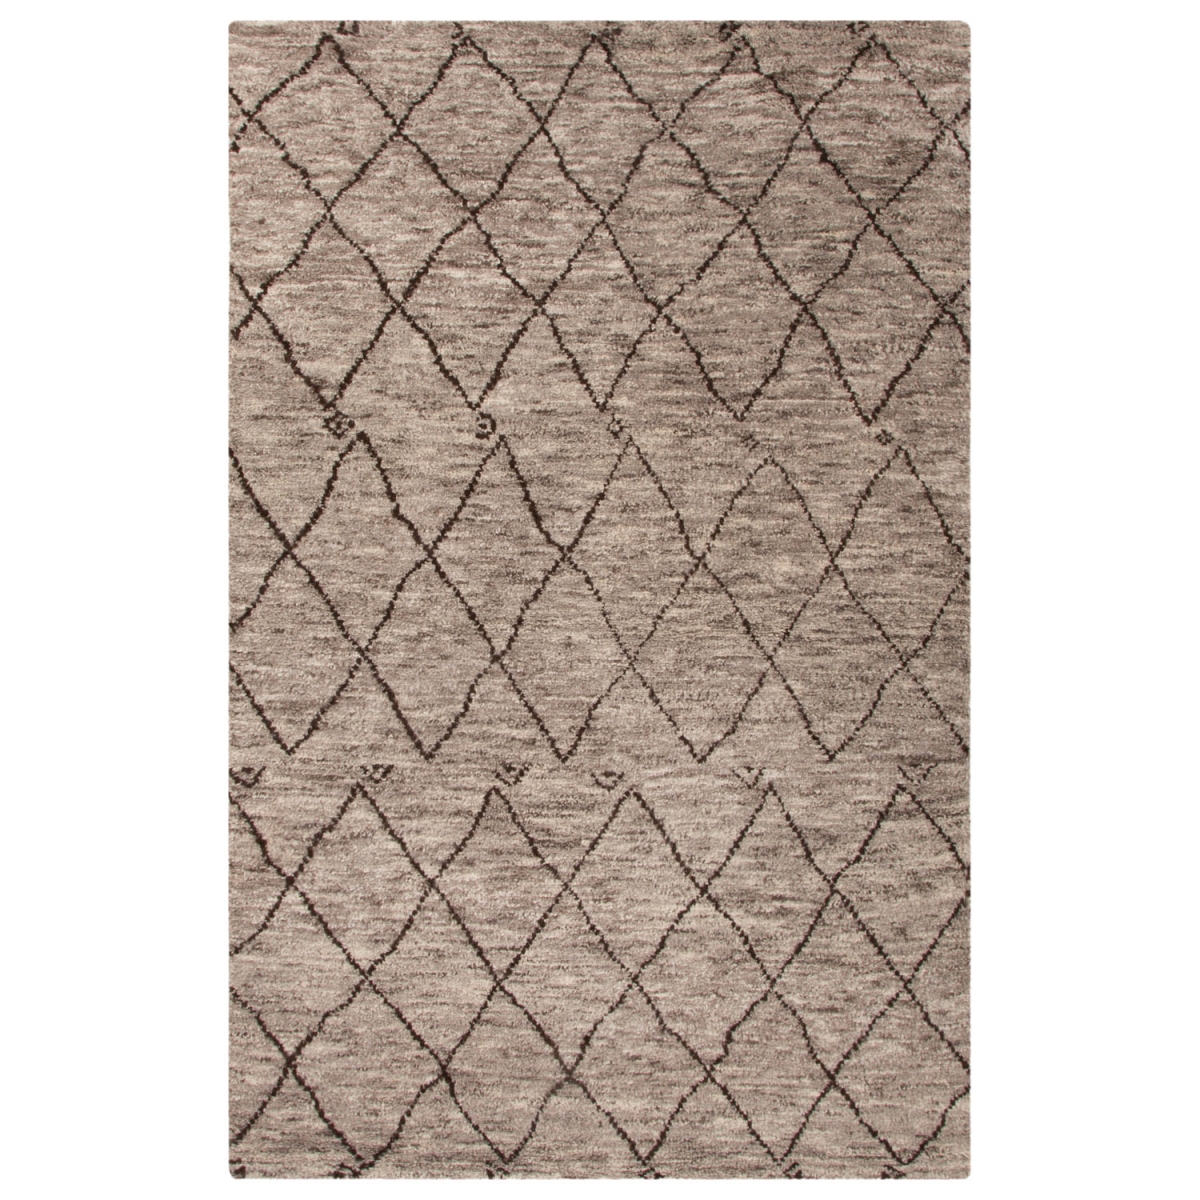 Rug128226 Zuri Persian 3.5 By 25 Hand Knotted Wool Batten Design Rectangle Rug, Chateau Gray - 9 X 12 Ft.